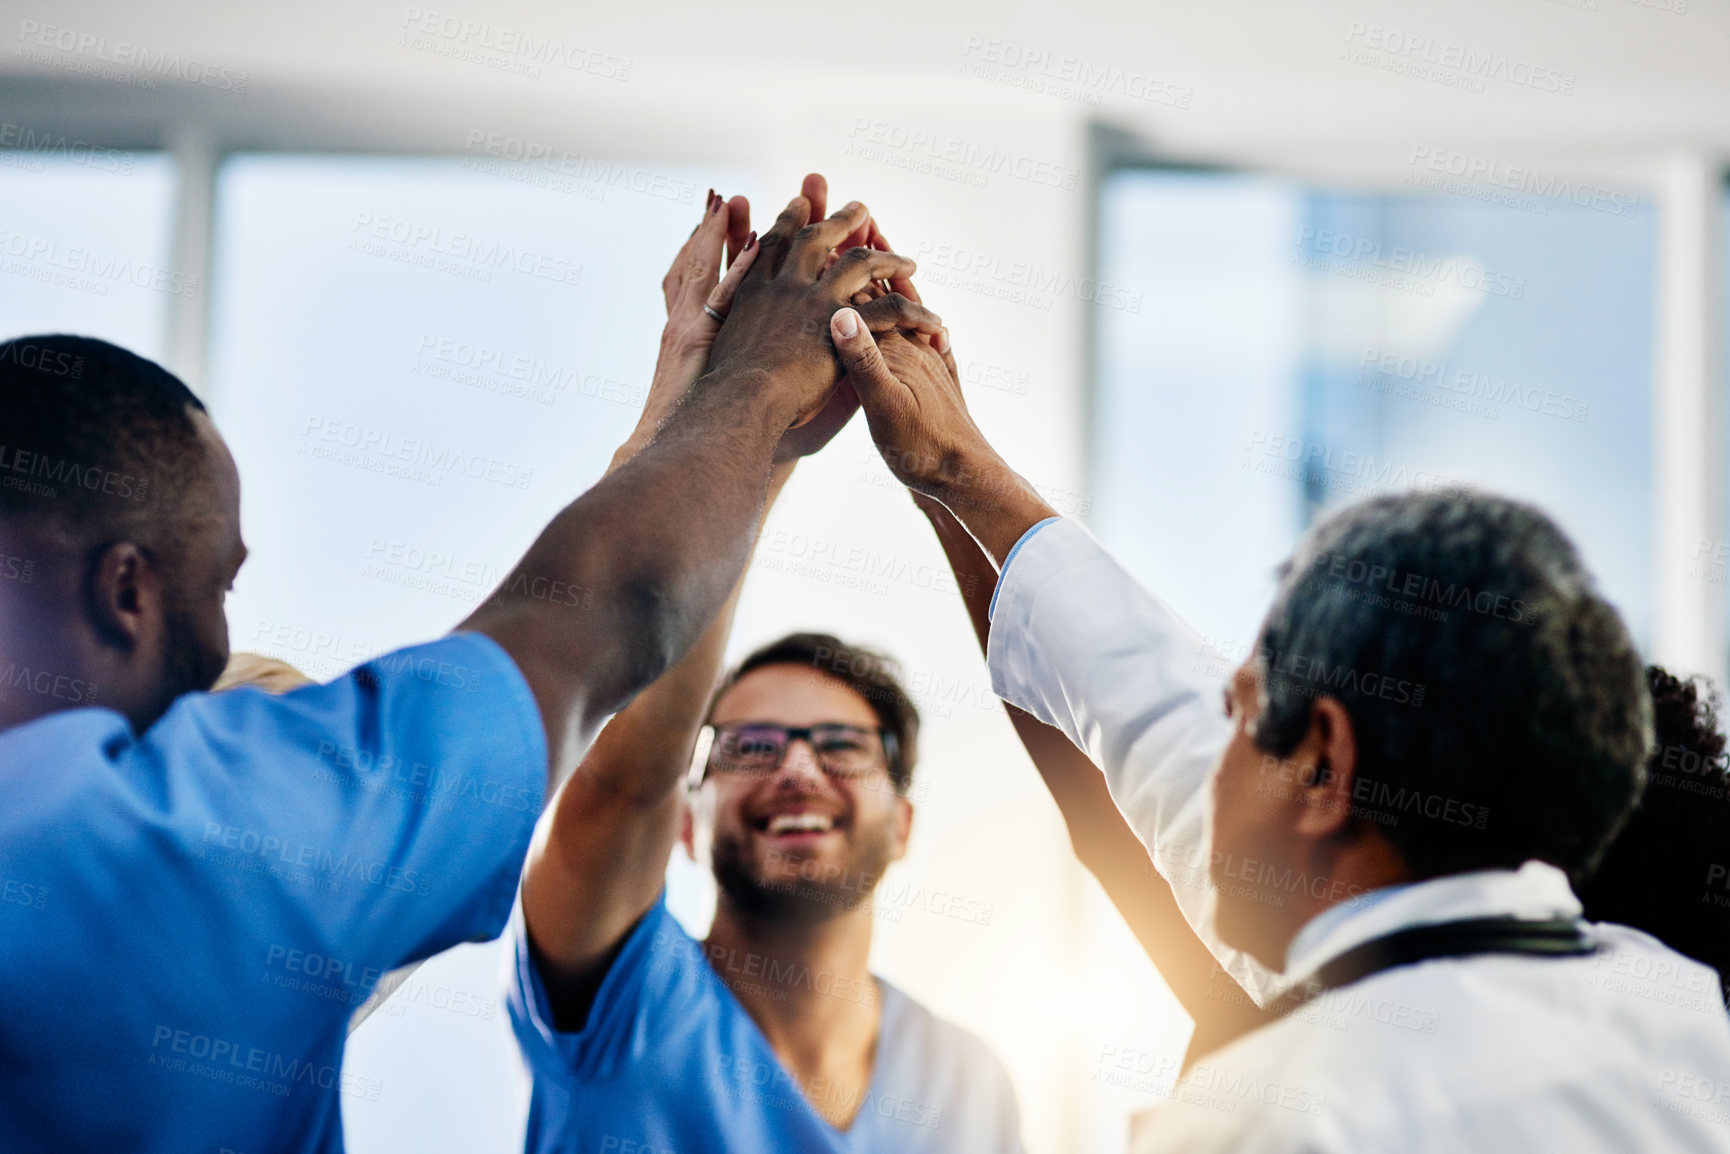 Buy stock photo Doctors celebrating medical success after working together as a team and give each other motivating a high five as a group in a hospital. Healthcare workers joining hands in a huddle showing teamwork